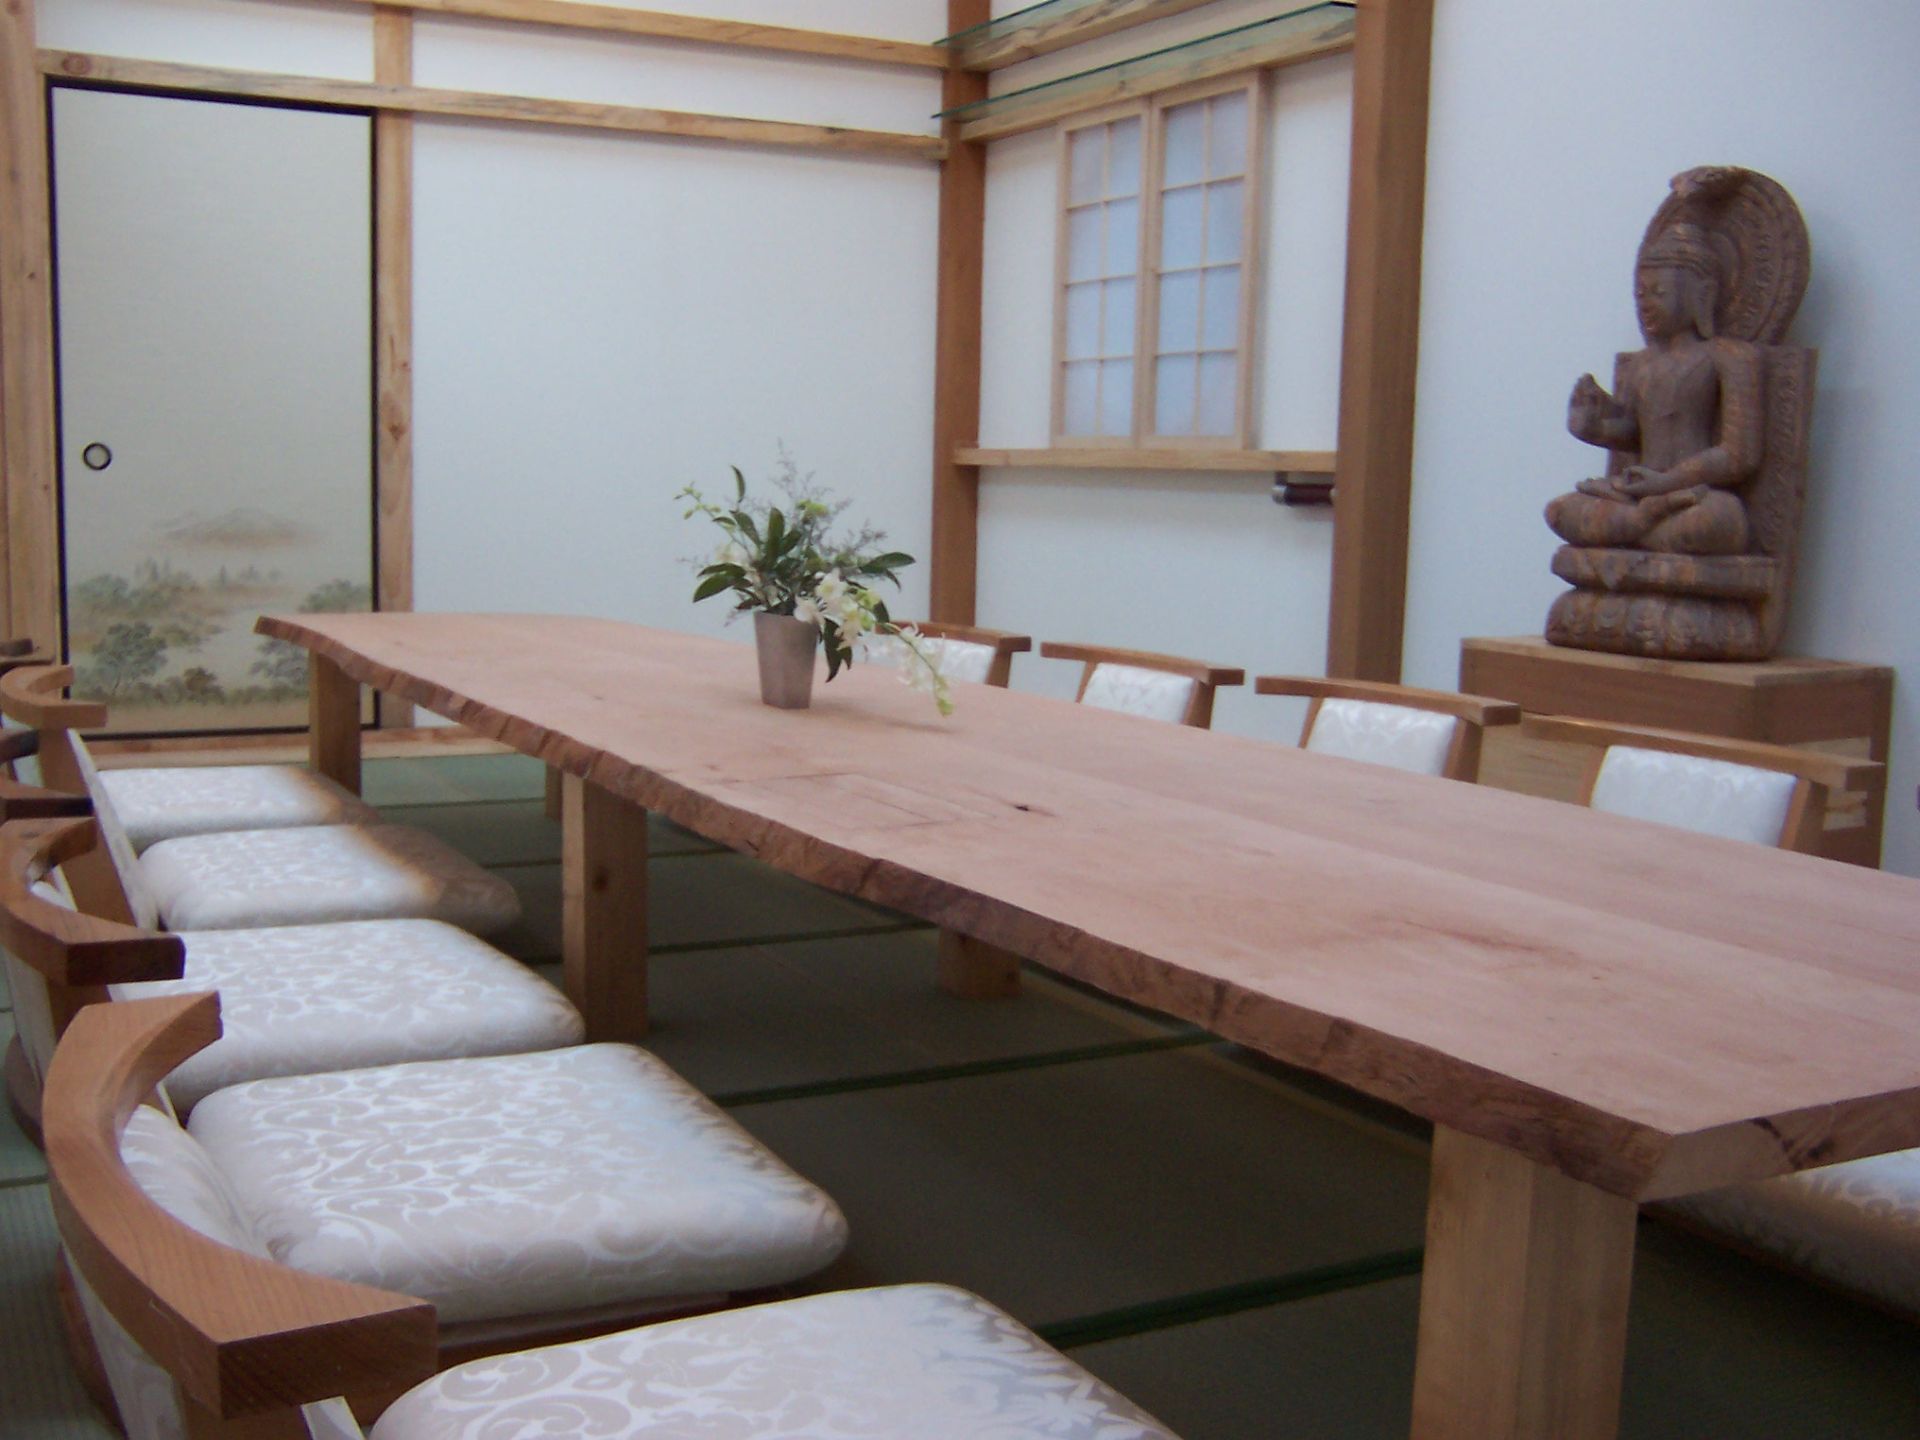 Indo-Japanese Tea House and Cultural Centre - SpaceMatters with Sanjeet Wahi'